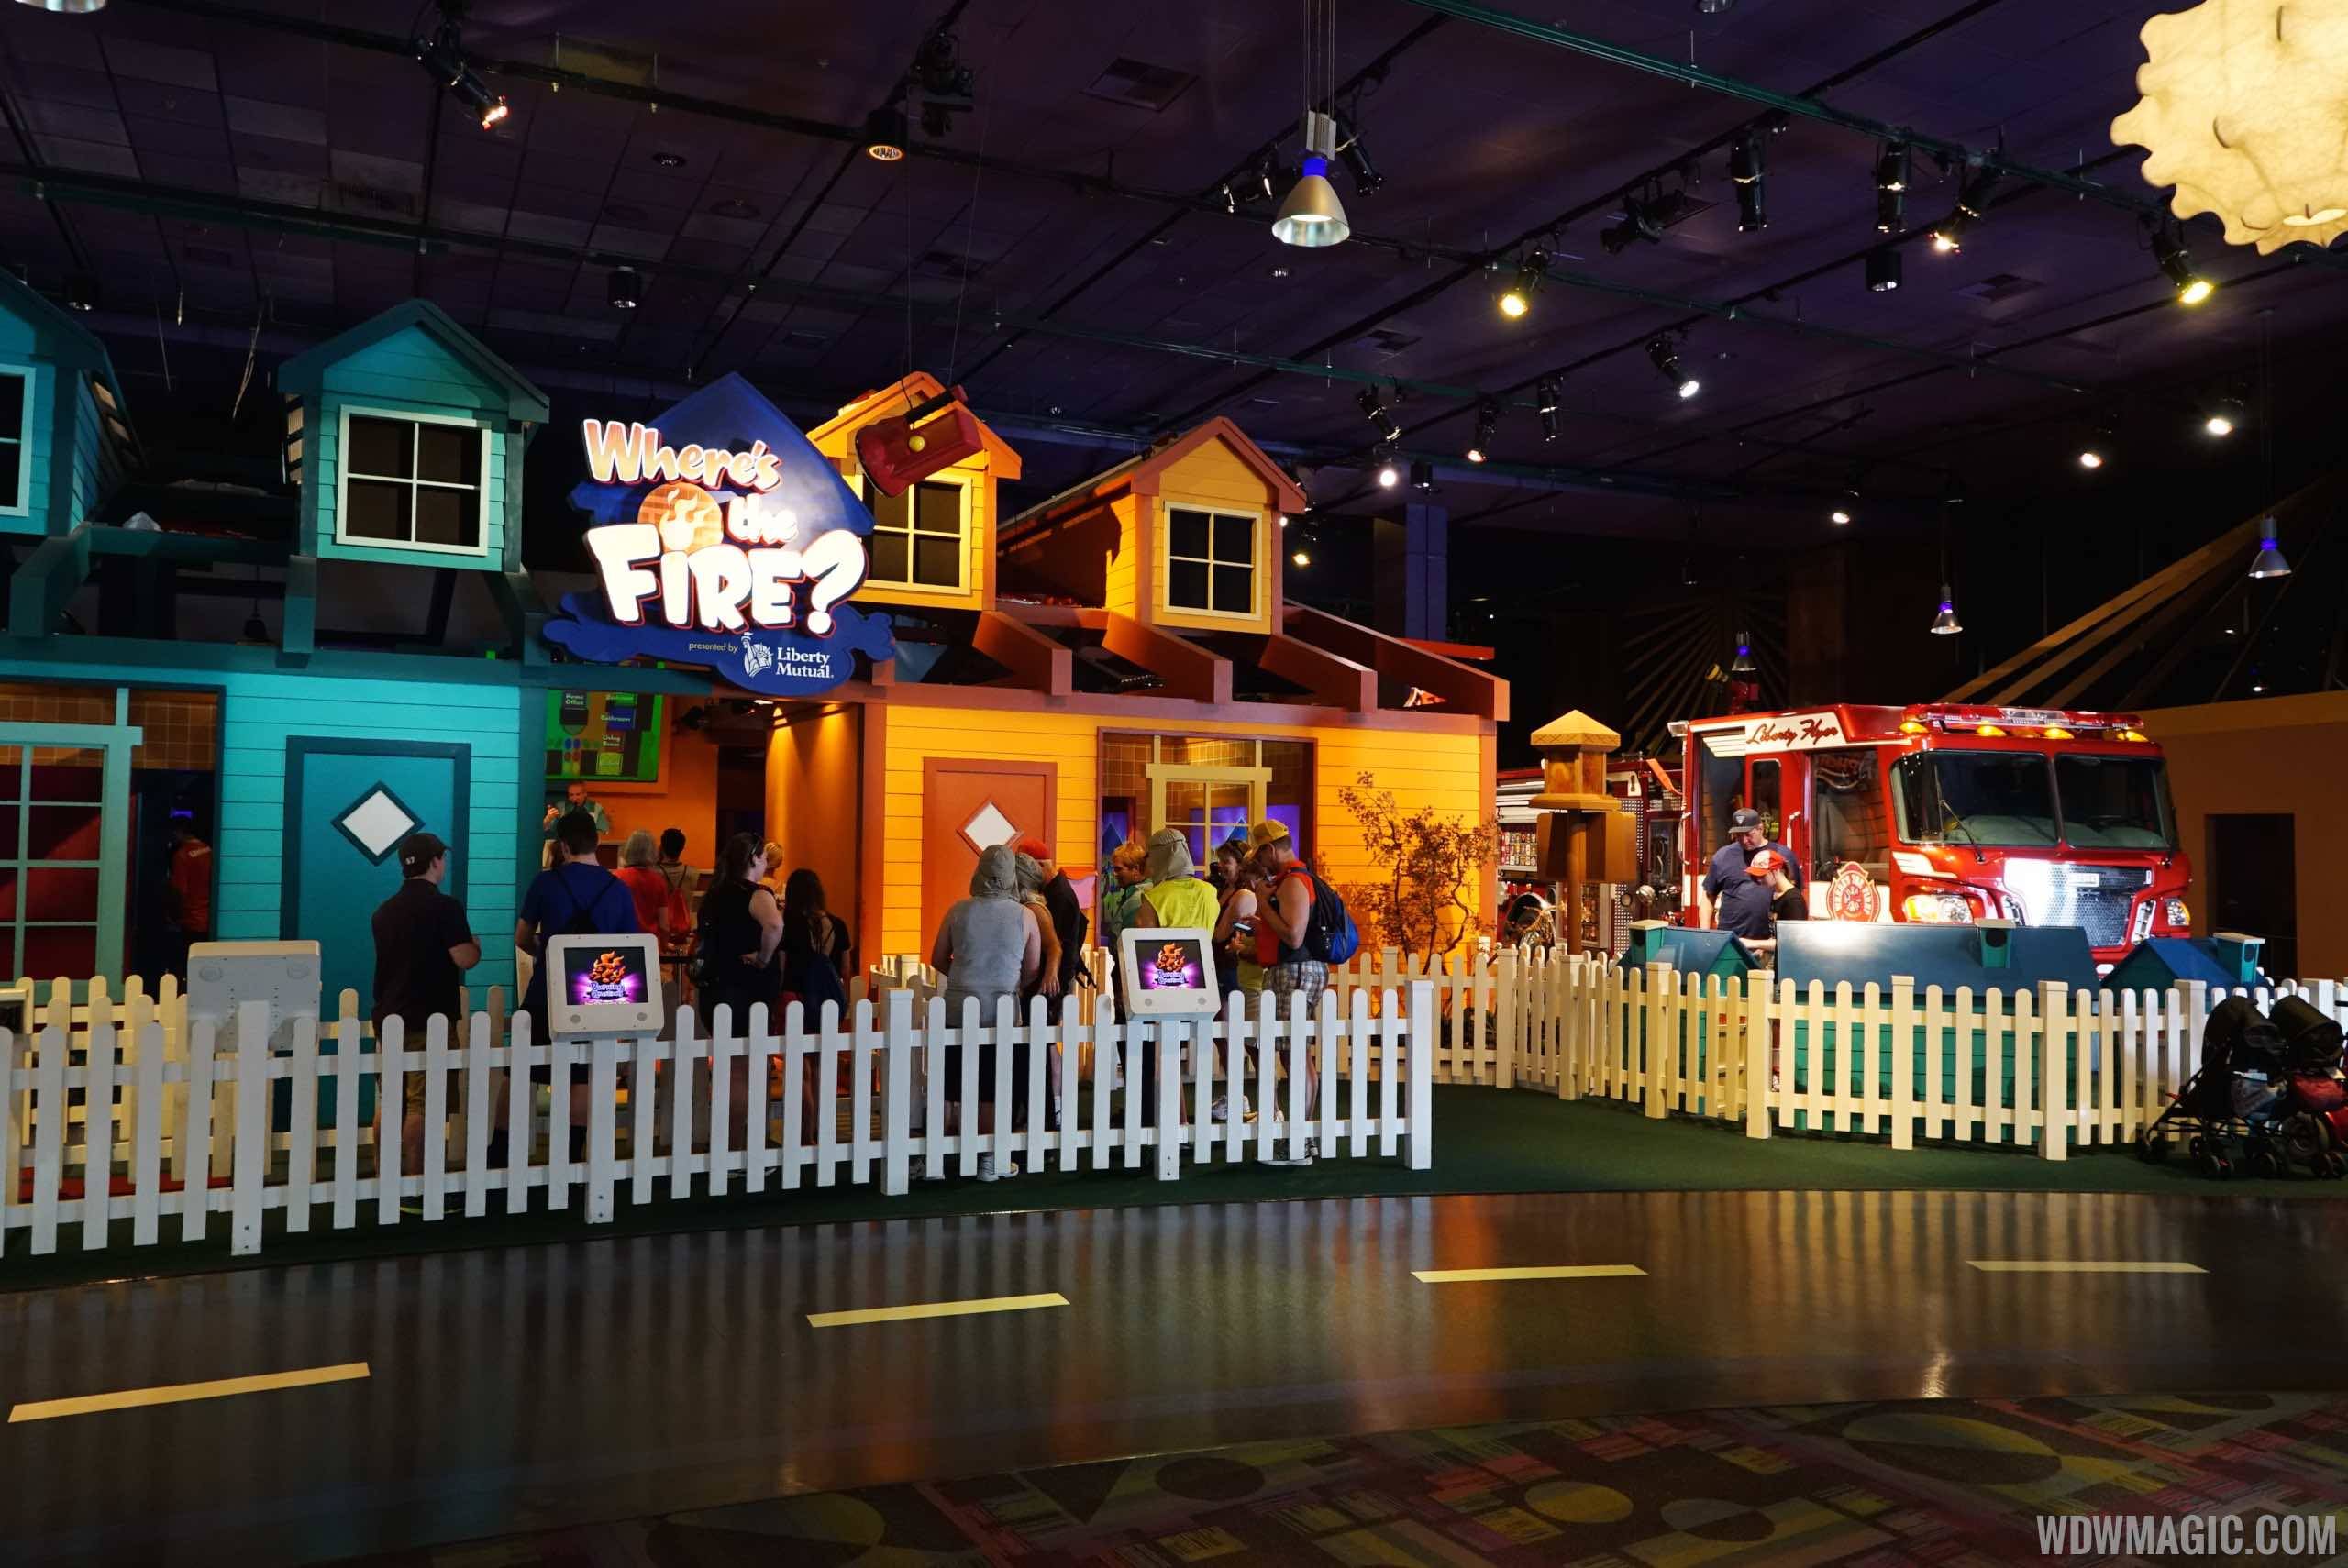 New interactive video game coming to Innoventions East